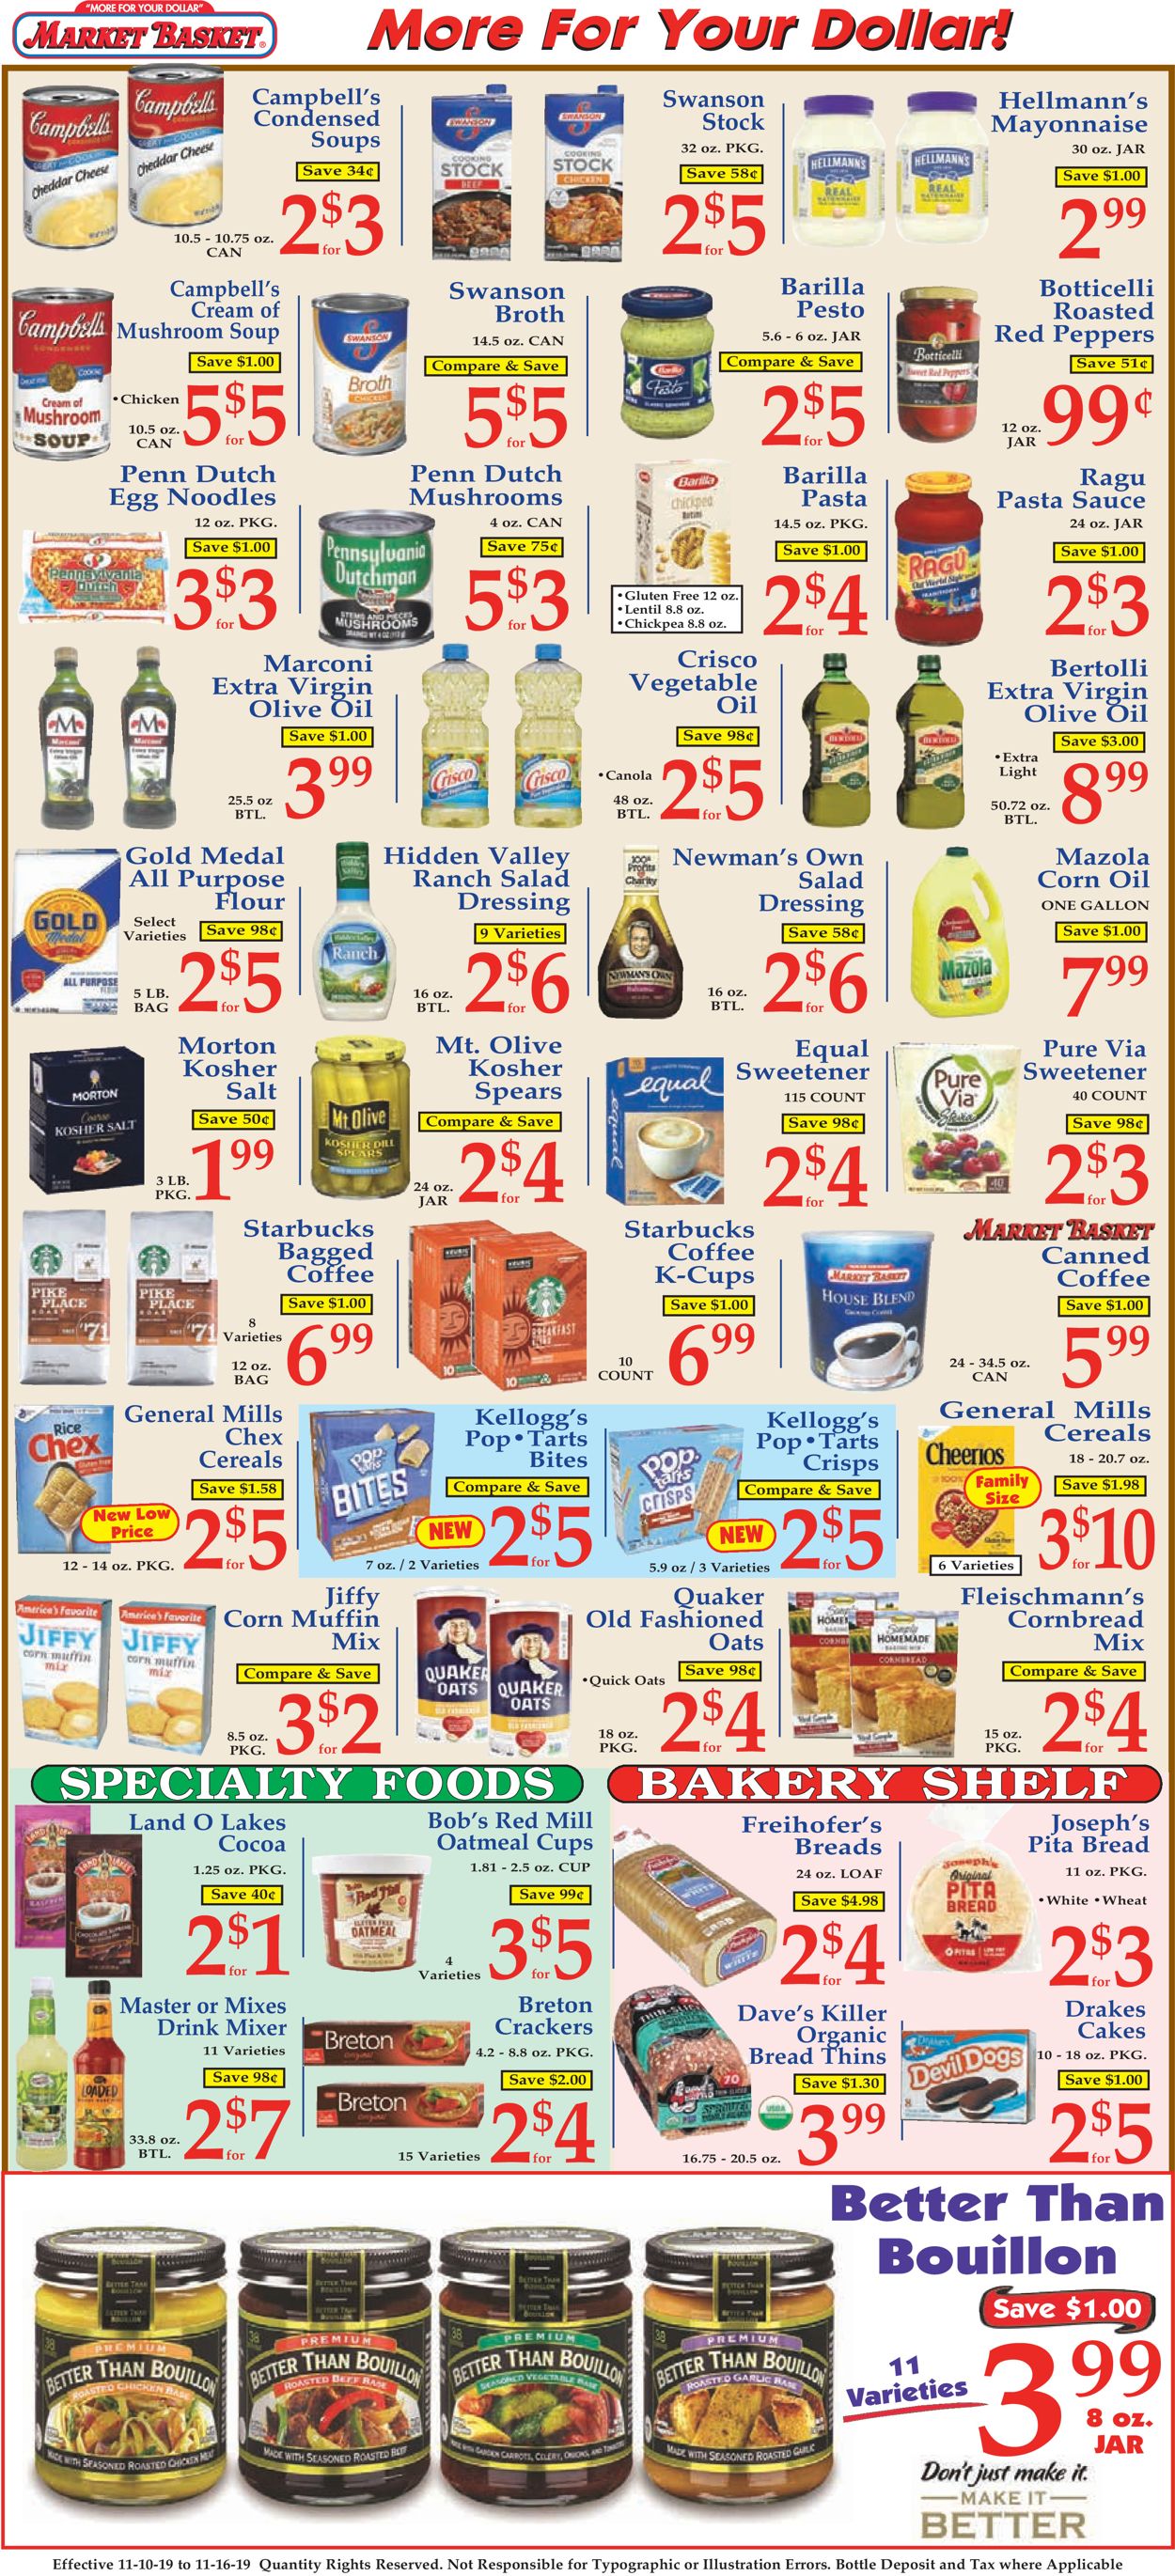 Market Basket Ad from 11/10/2019